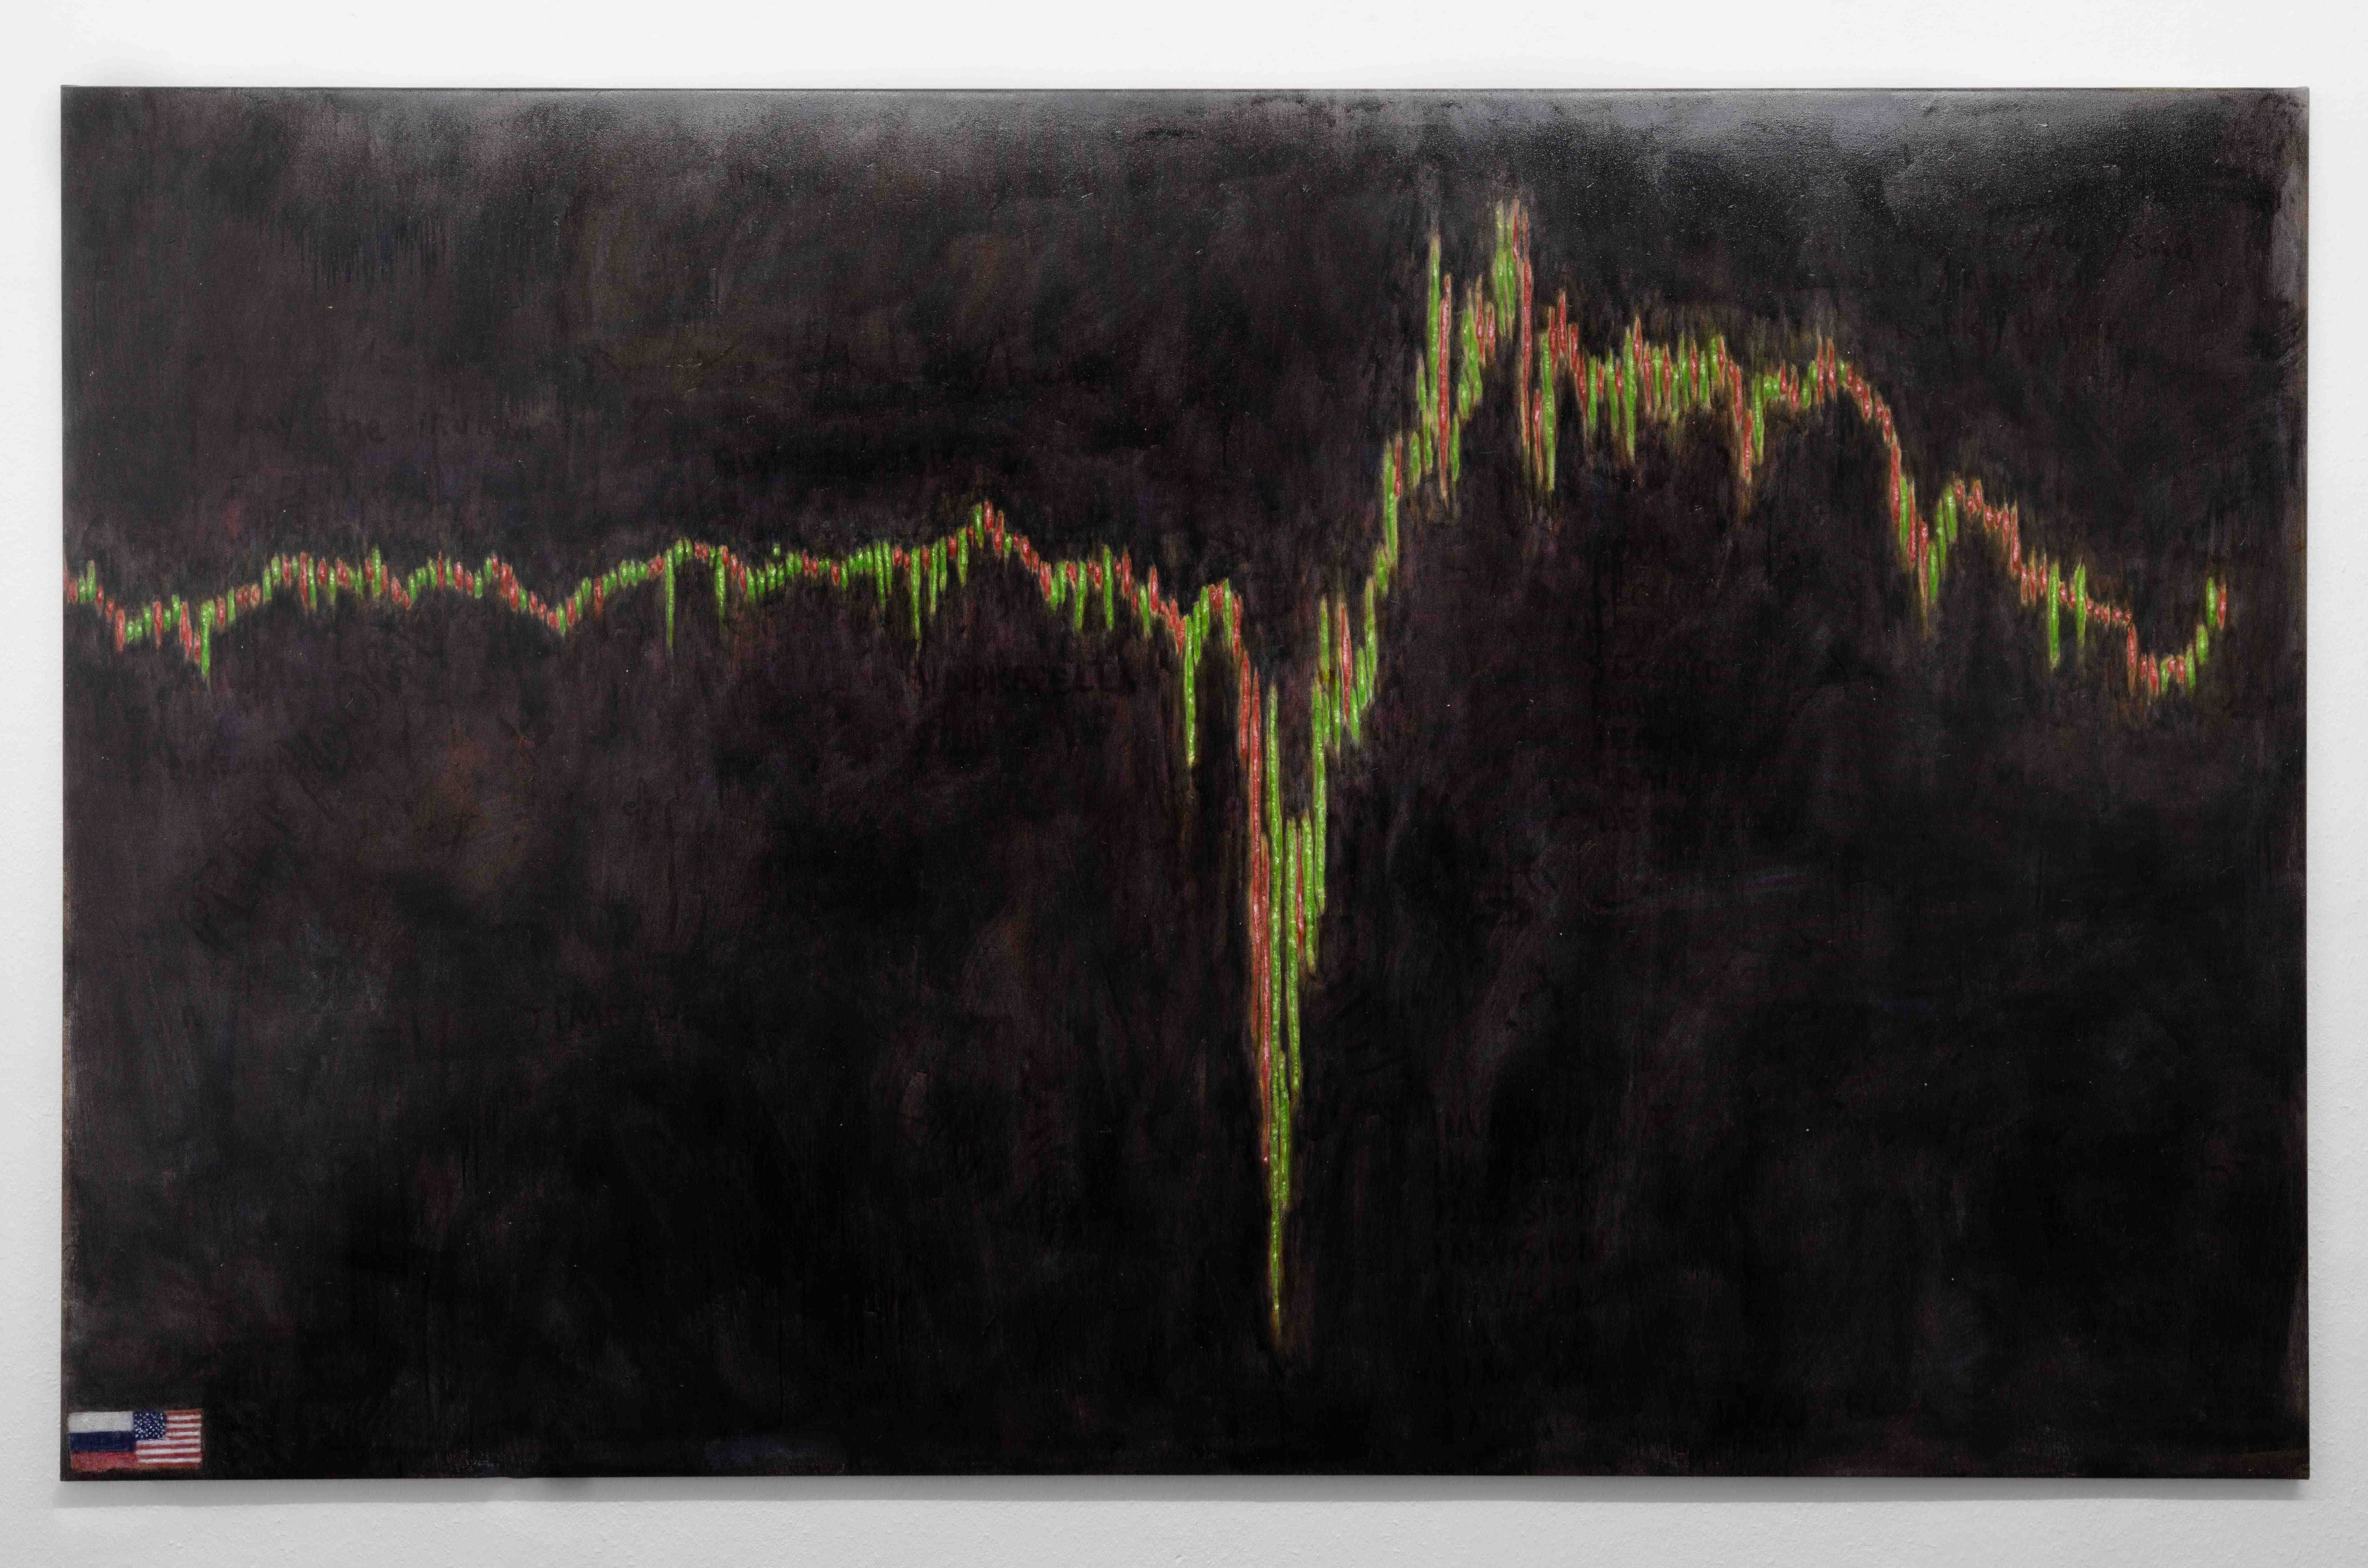 Andy Schumacher, ruble/usd before and during ukrainian war, 2023, Oil on canvas, 250cm x 155cm